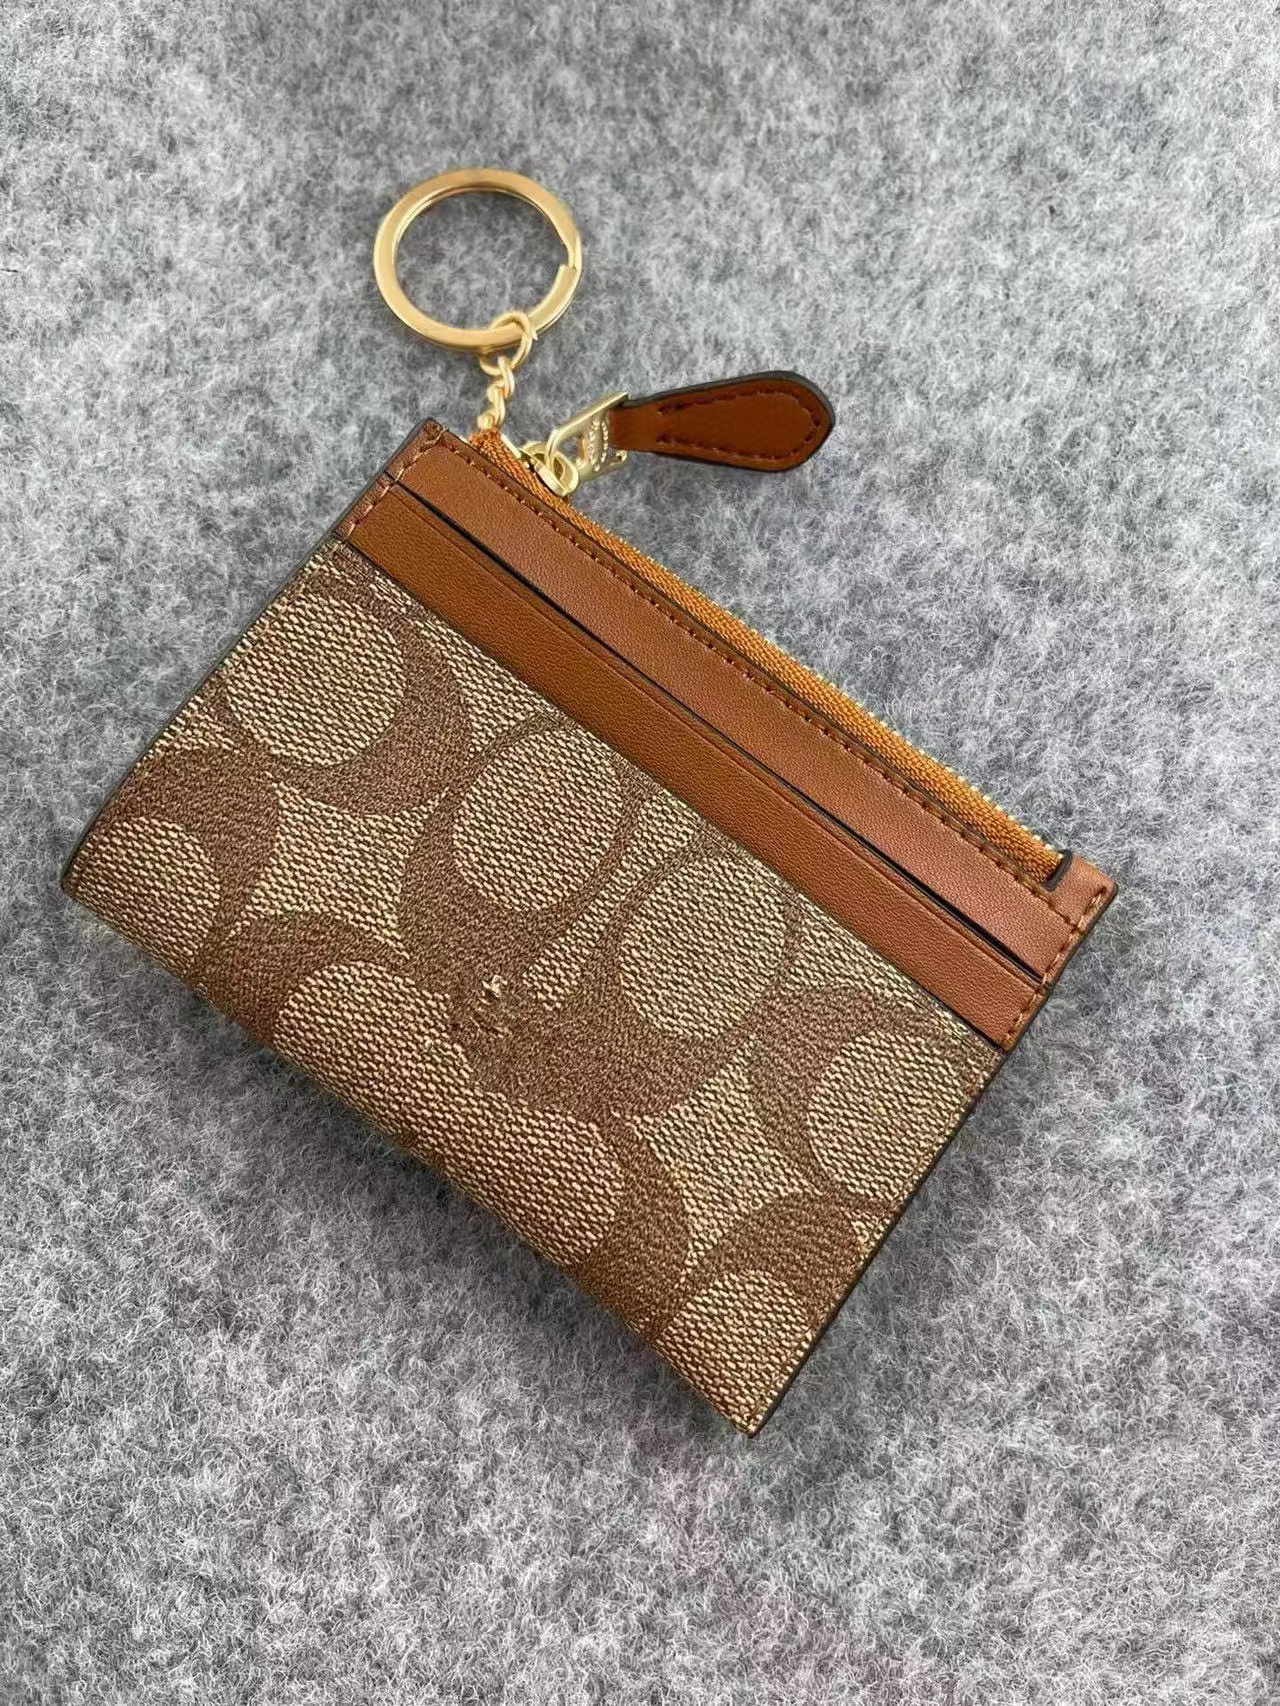 Designer Wallet Classic Key Bag change purse Mini Card Bag Key Ring Credit Card Holder Key chain ID Card Coin Wallet Men's and women's purse gift Box packaging